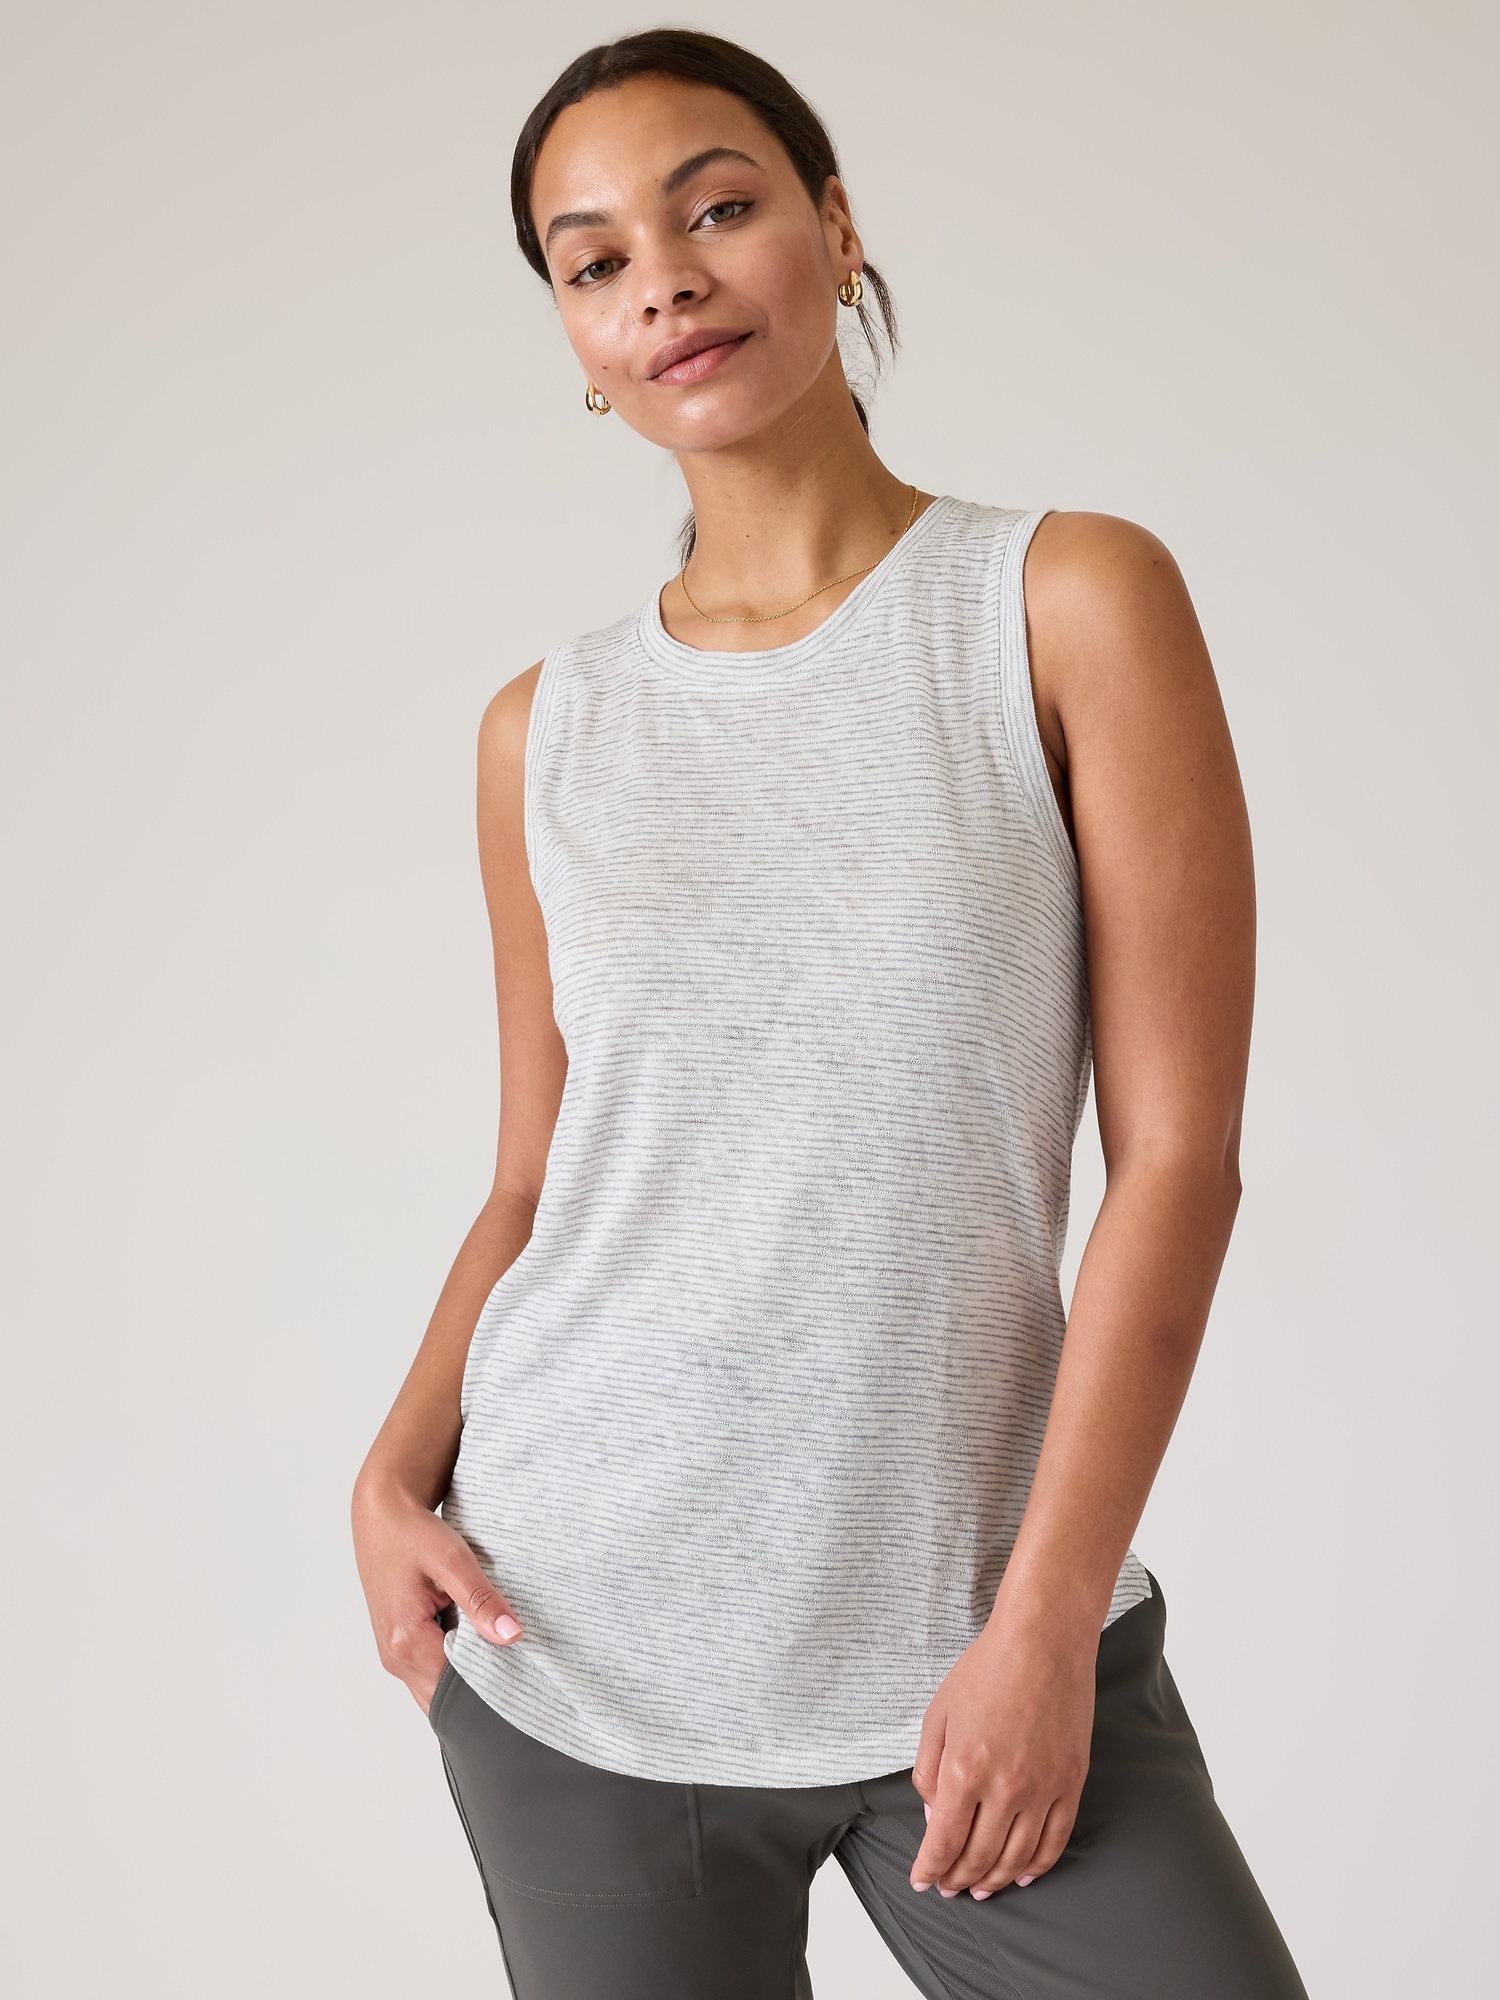 More Than 16,000  Shoppers Swear by This Breezy Tank Top